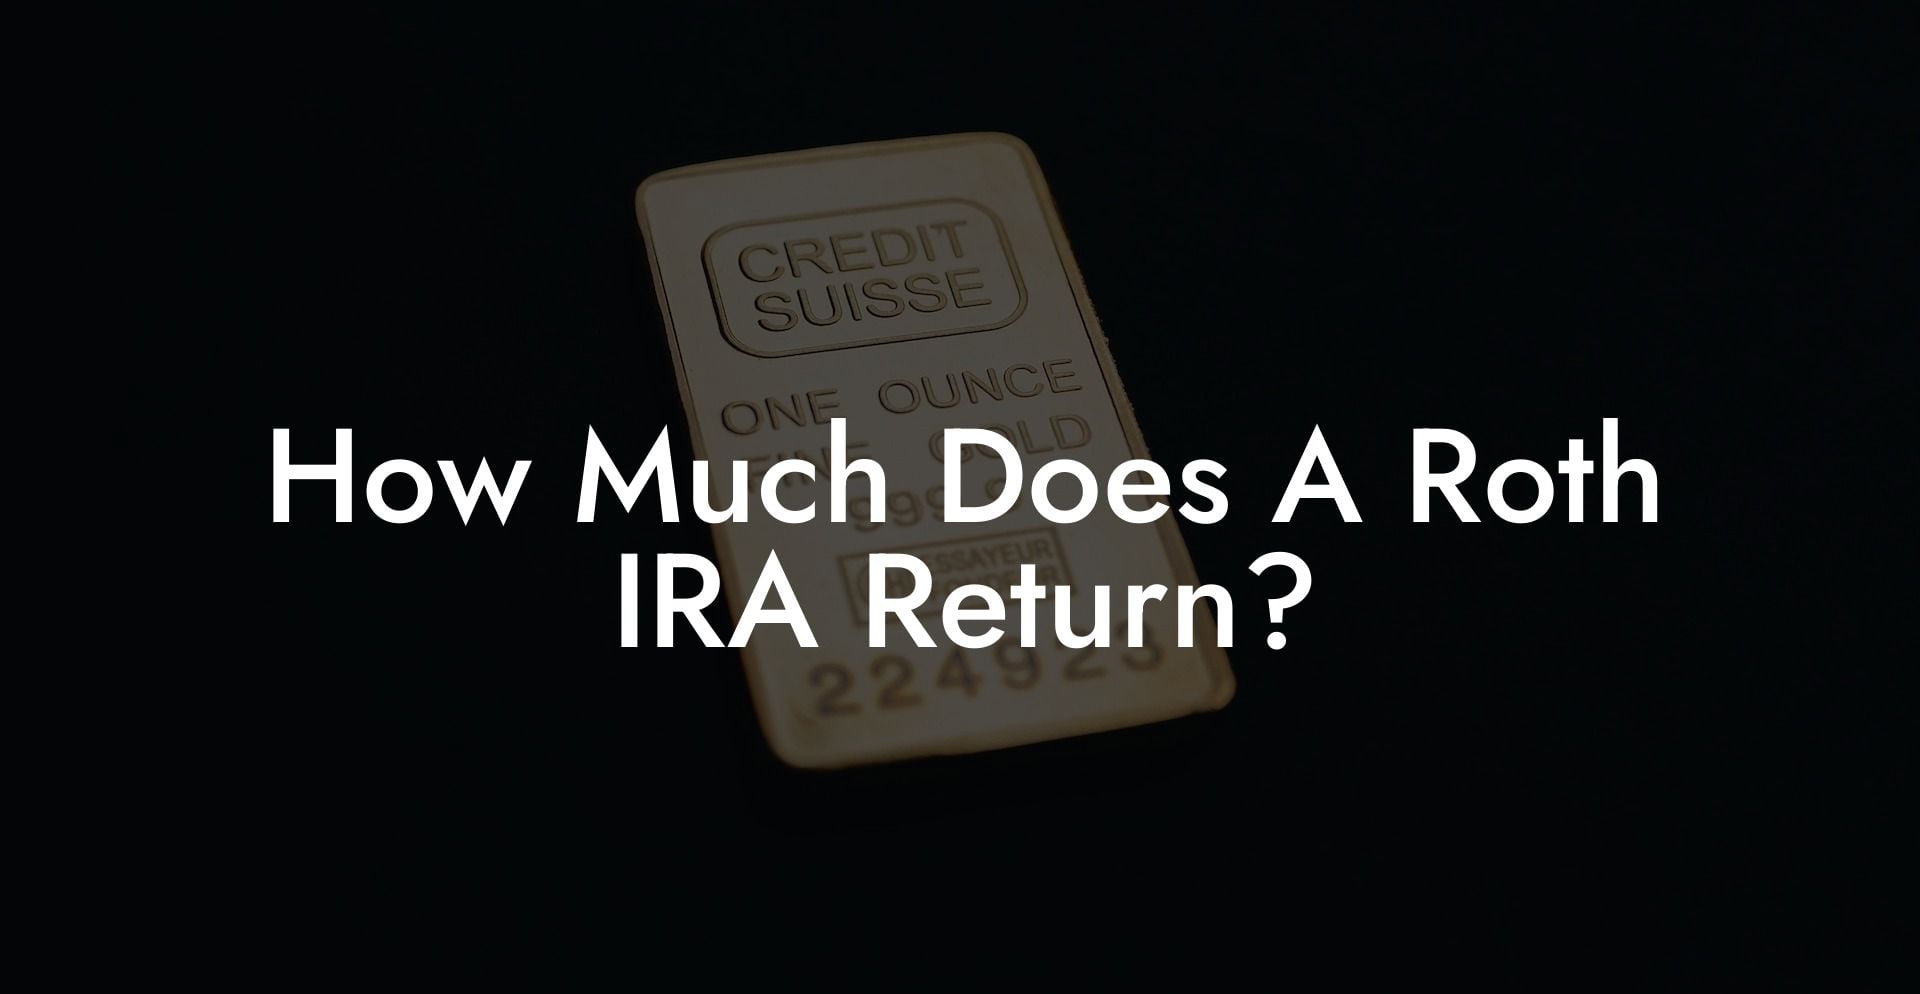 How Much Does A Roth IRA Return?